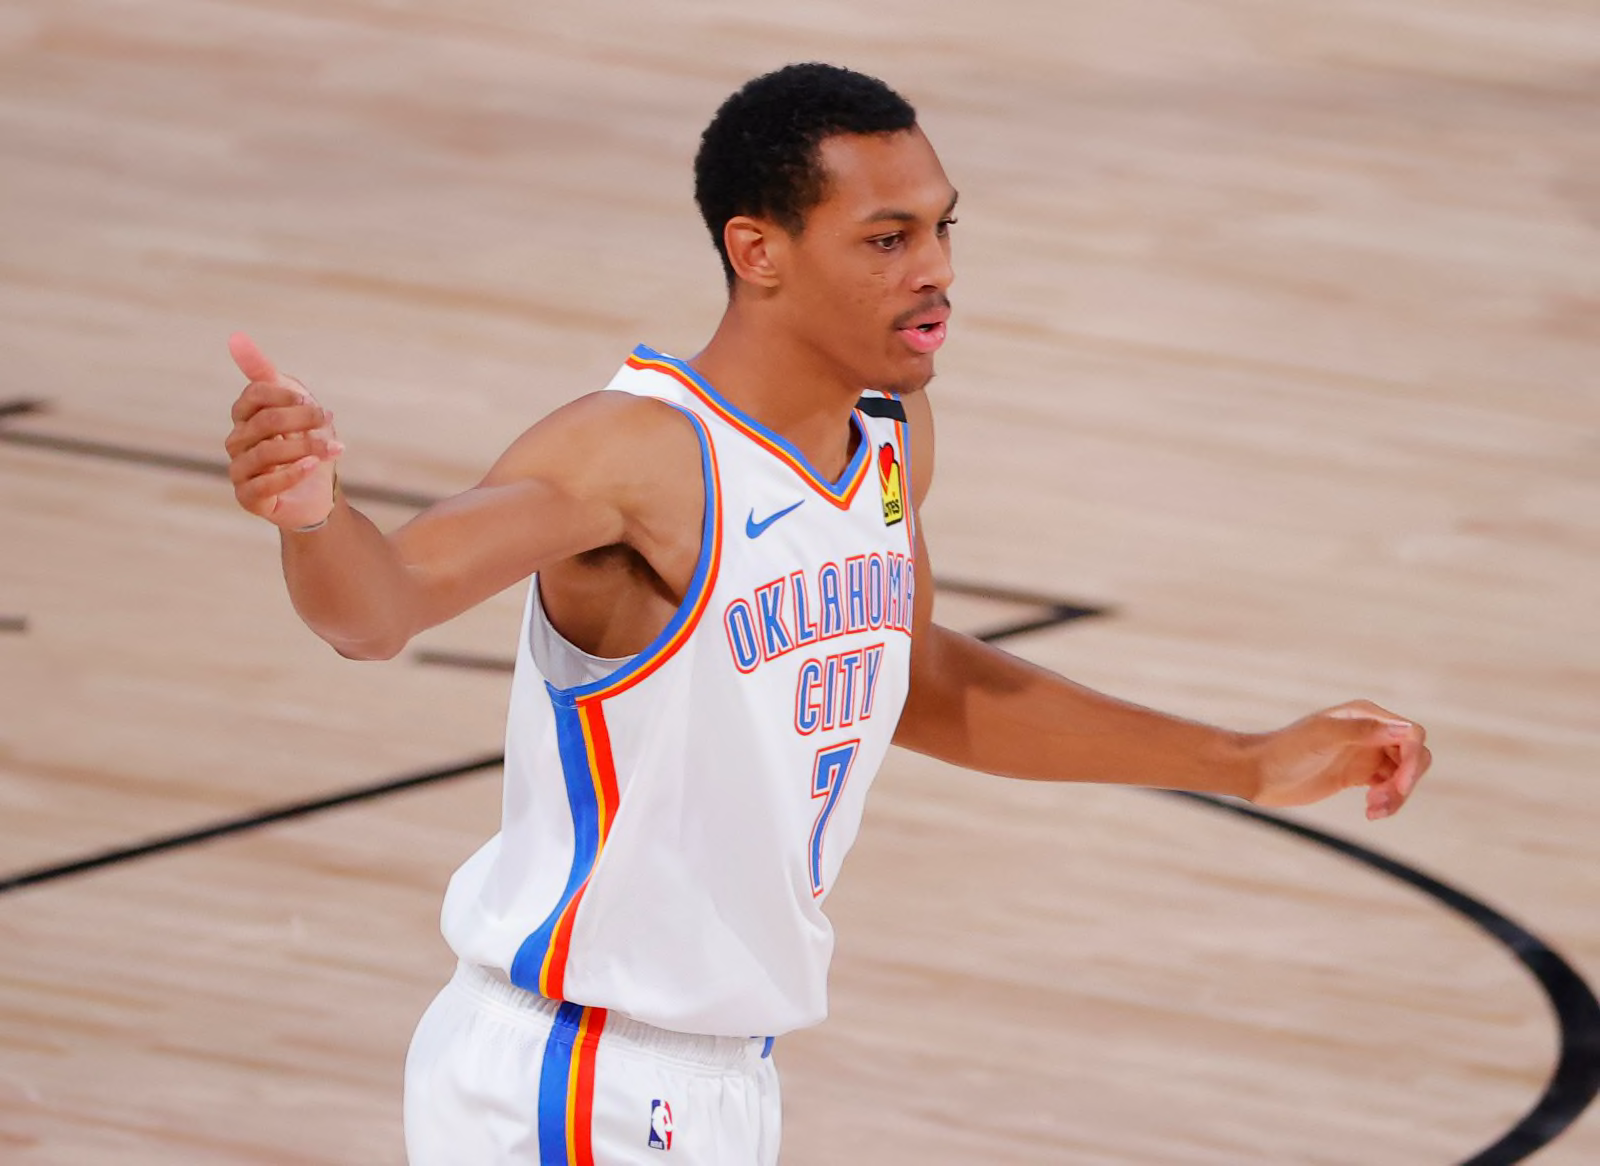 Darius Bazley given a much needed reset as OKC improves their team